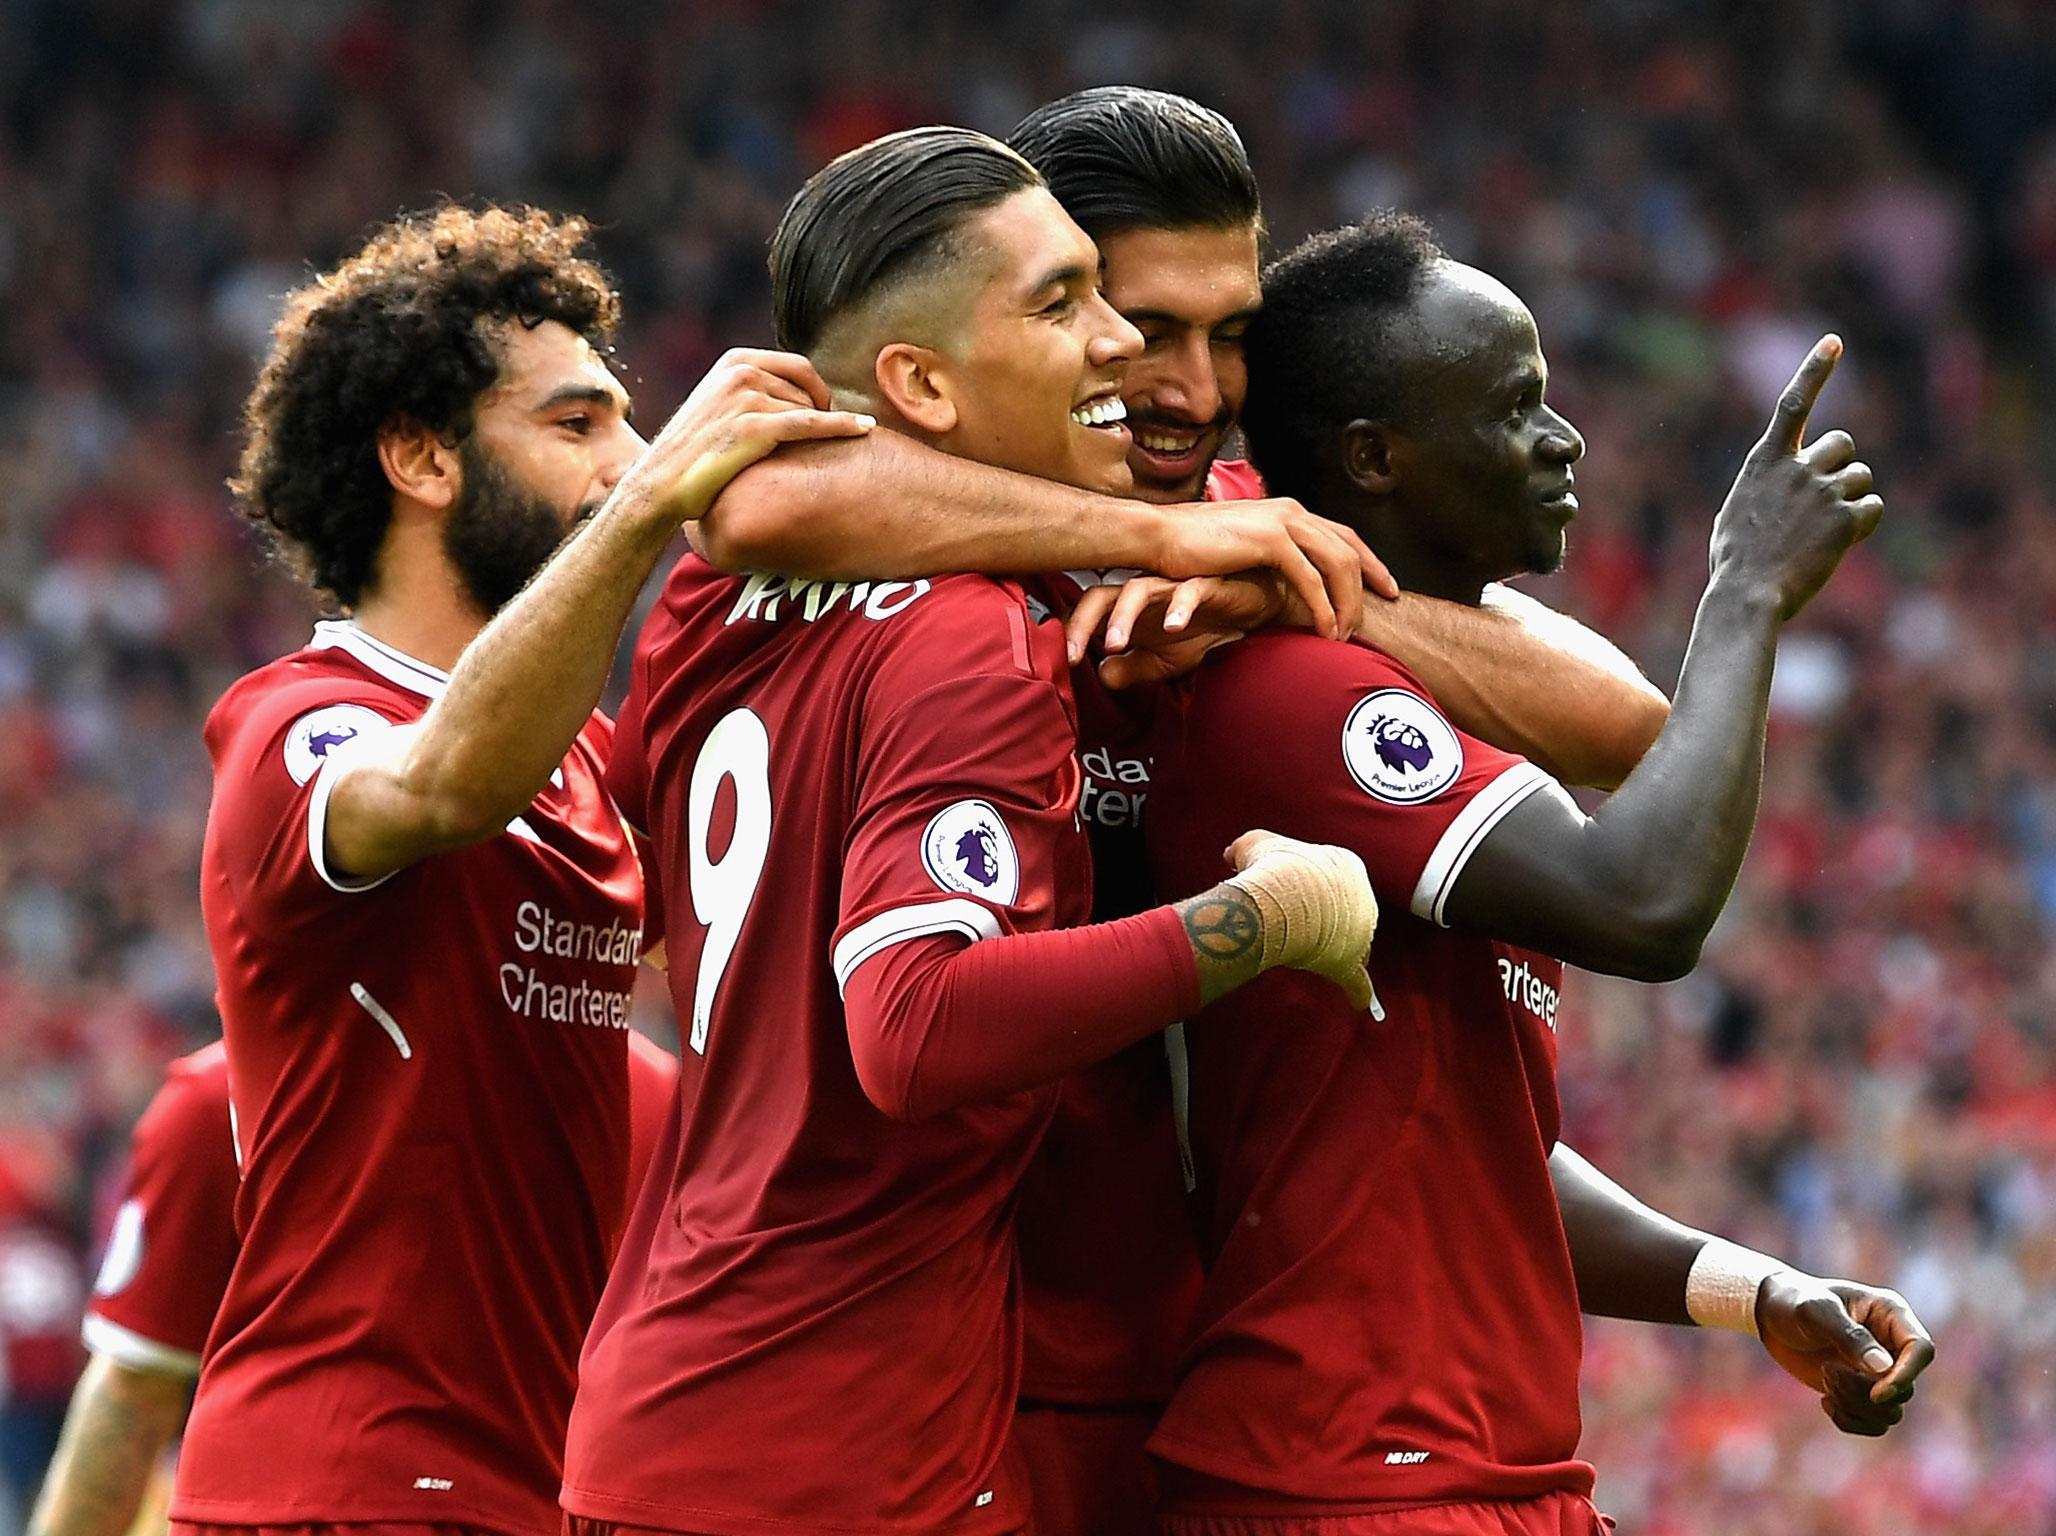 Liverpool have reaped the rewards of a data-driven approach